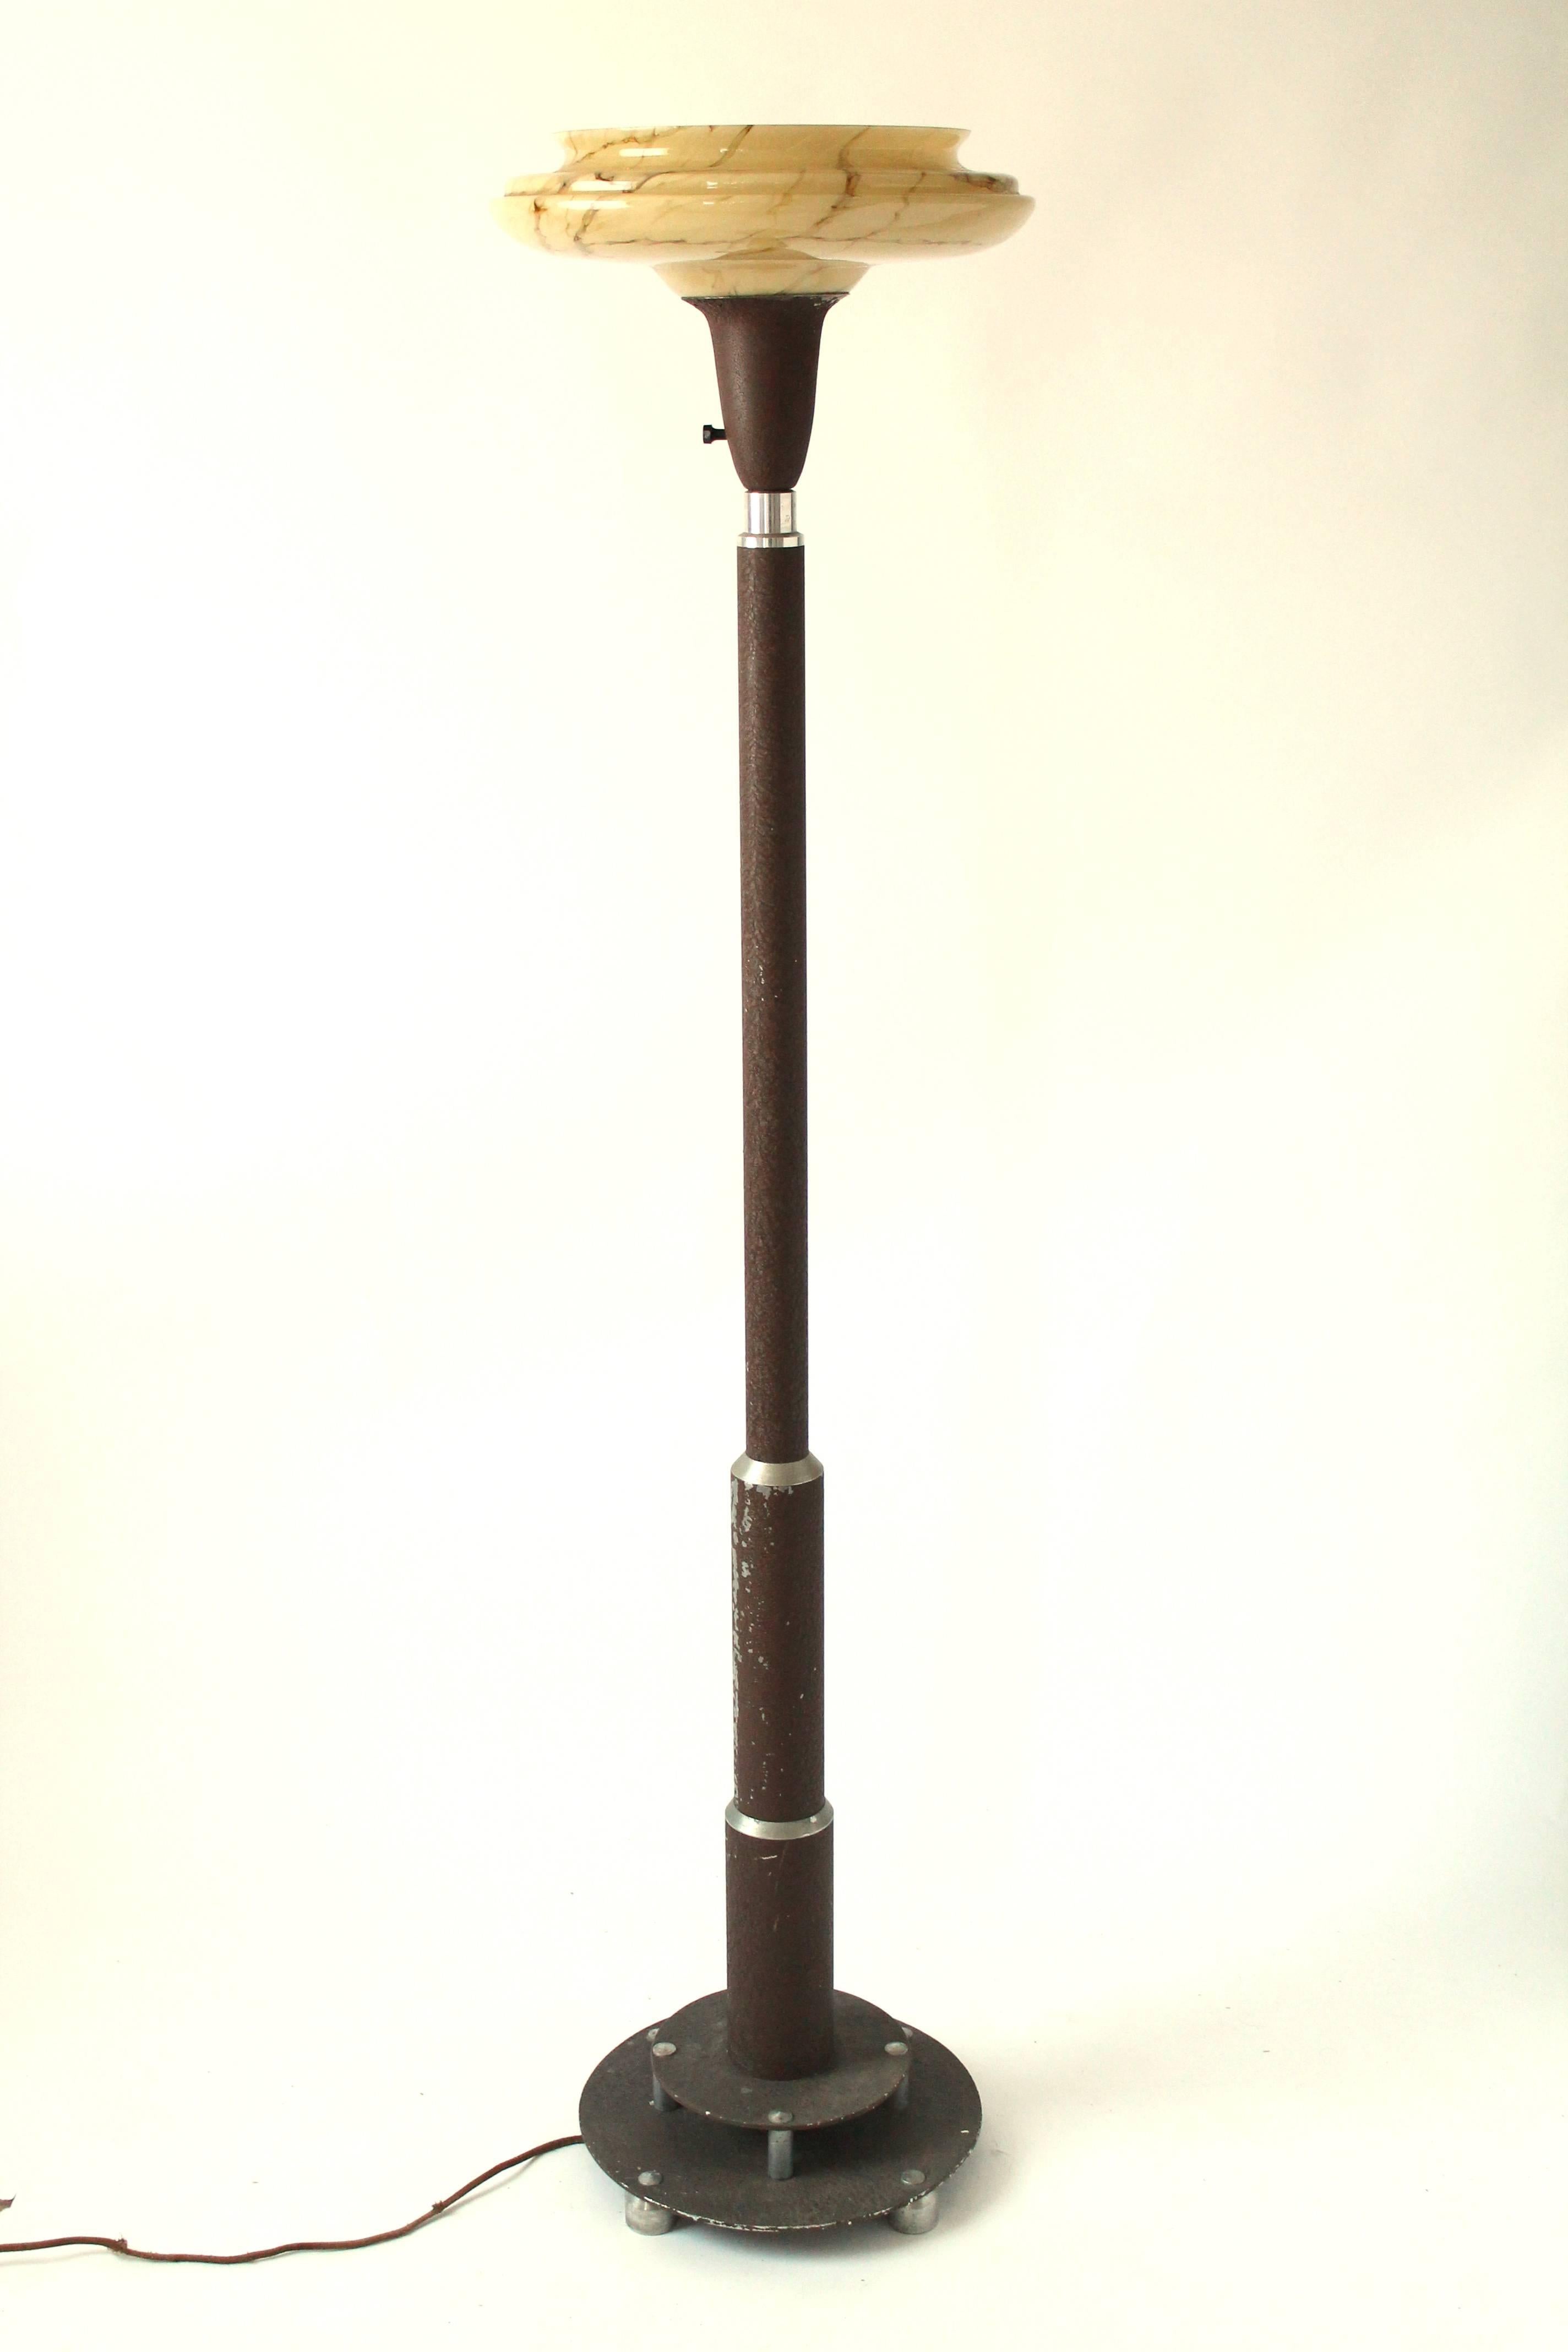 Well made Machine Age floor lamp fabricated out of milled aluminium. Solid, sturdy construction. Chocolate brown wrinkle finish. Marble effect glass shade in a warm beige tone with brown streak.